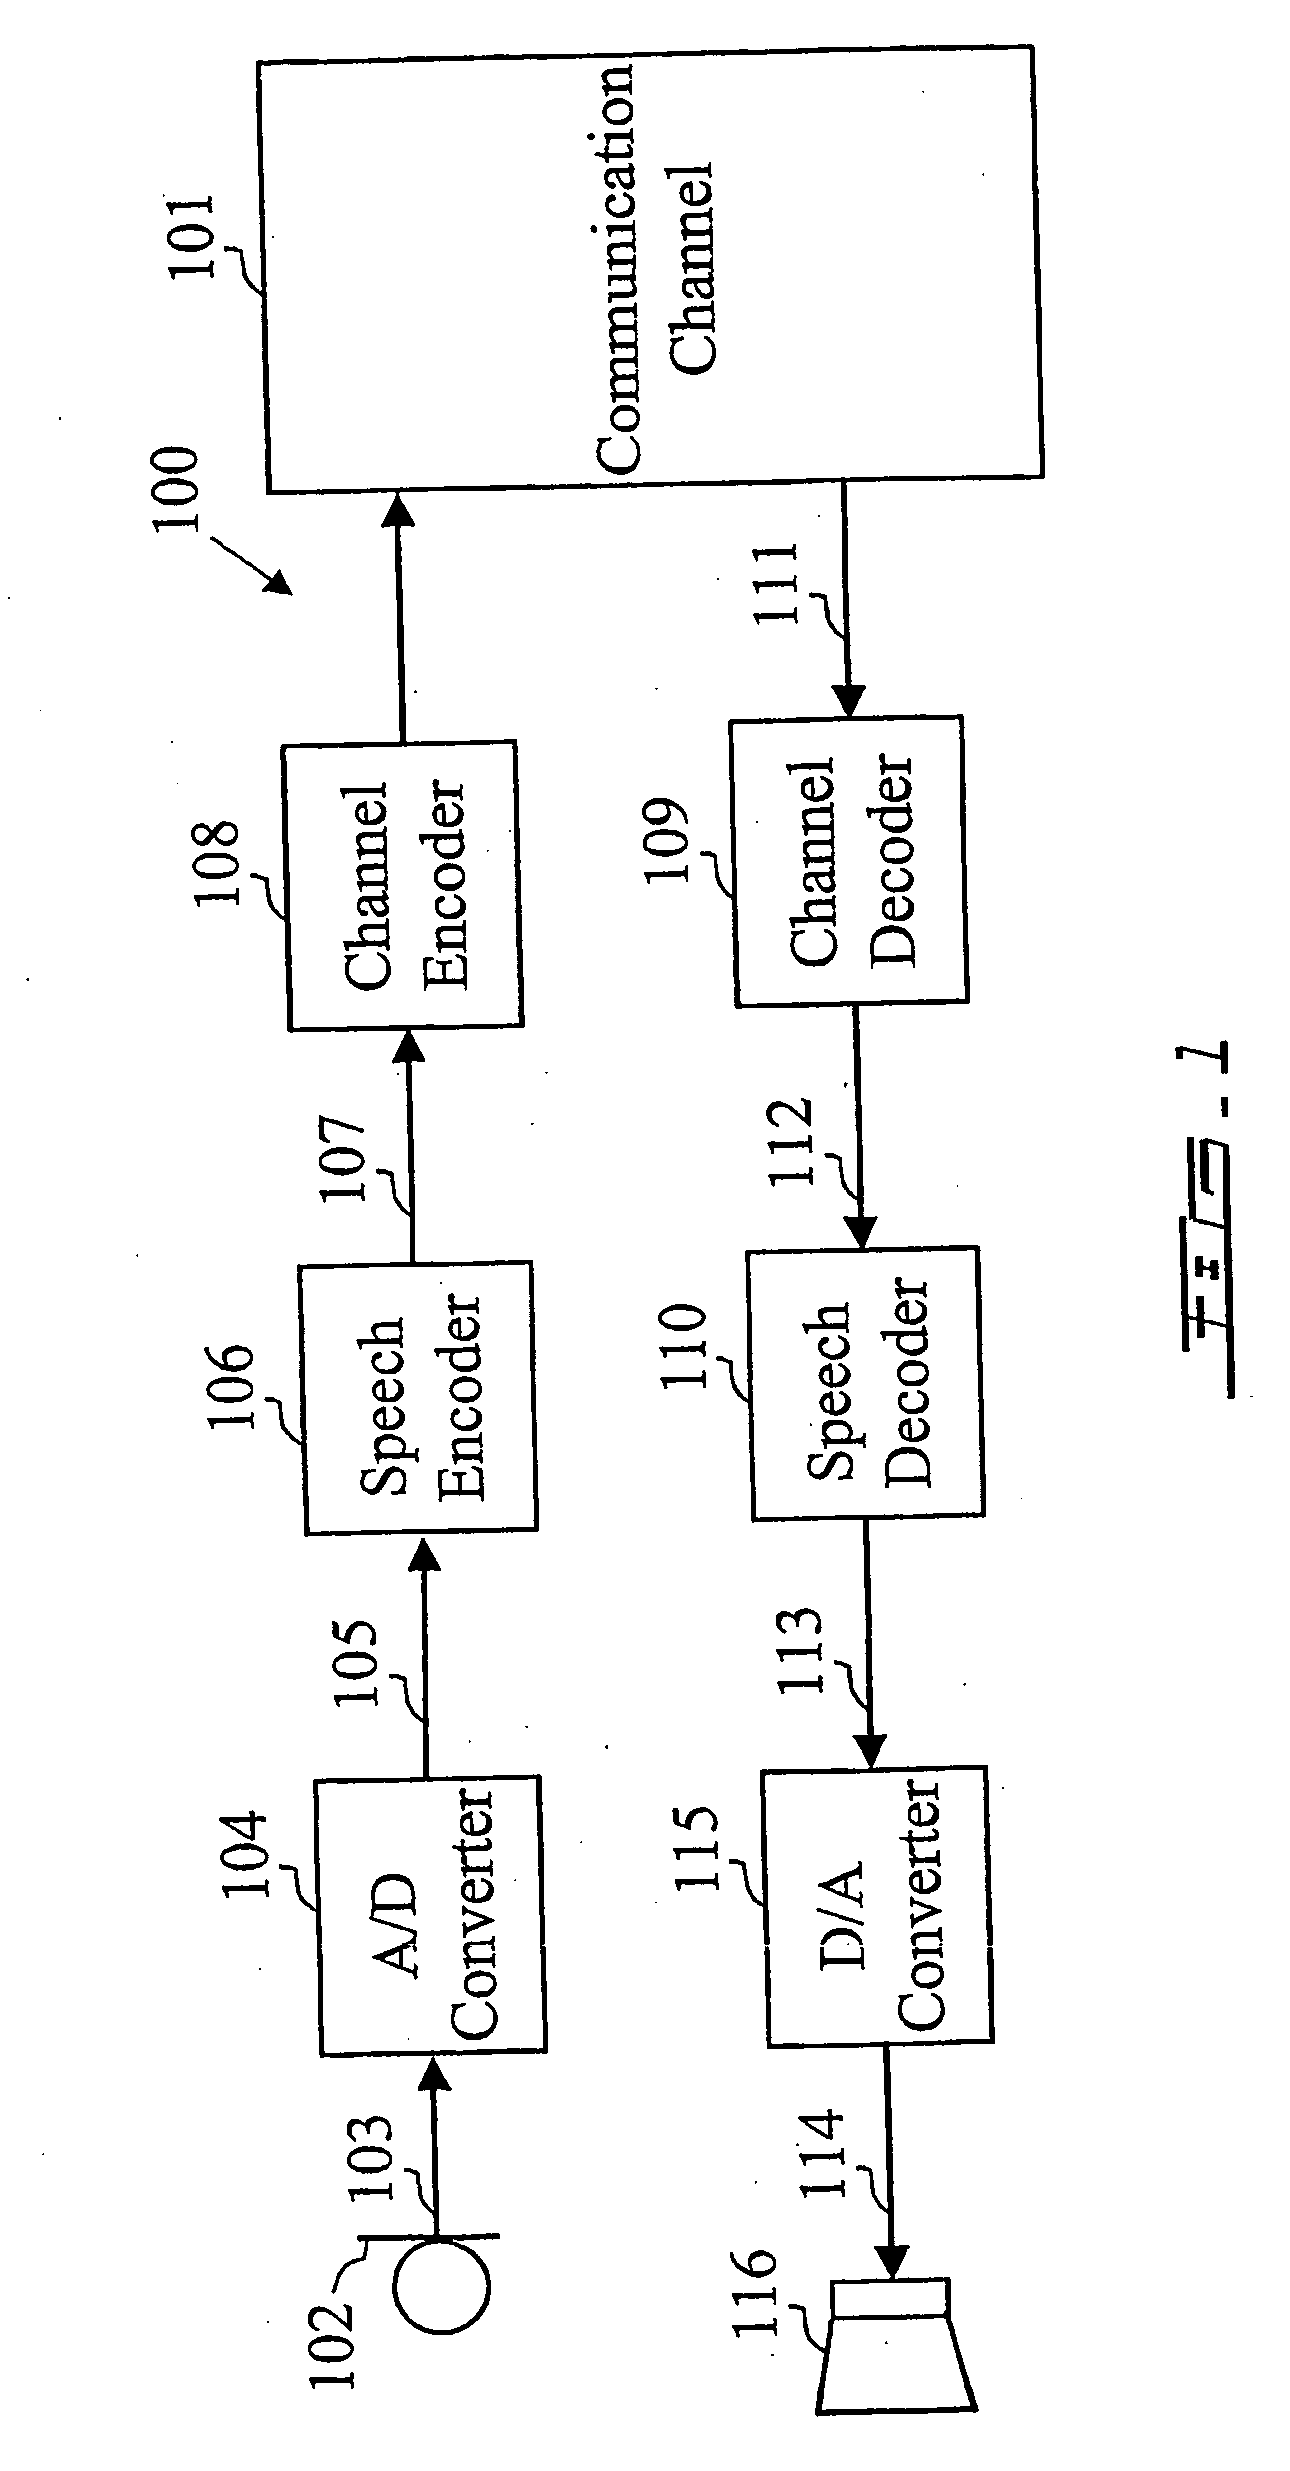 Method and device for efficient frame erasure concealment in linear predictive based speech codecs